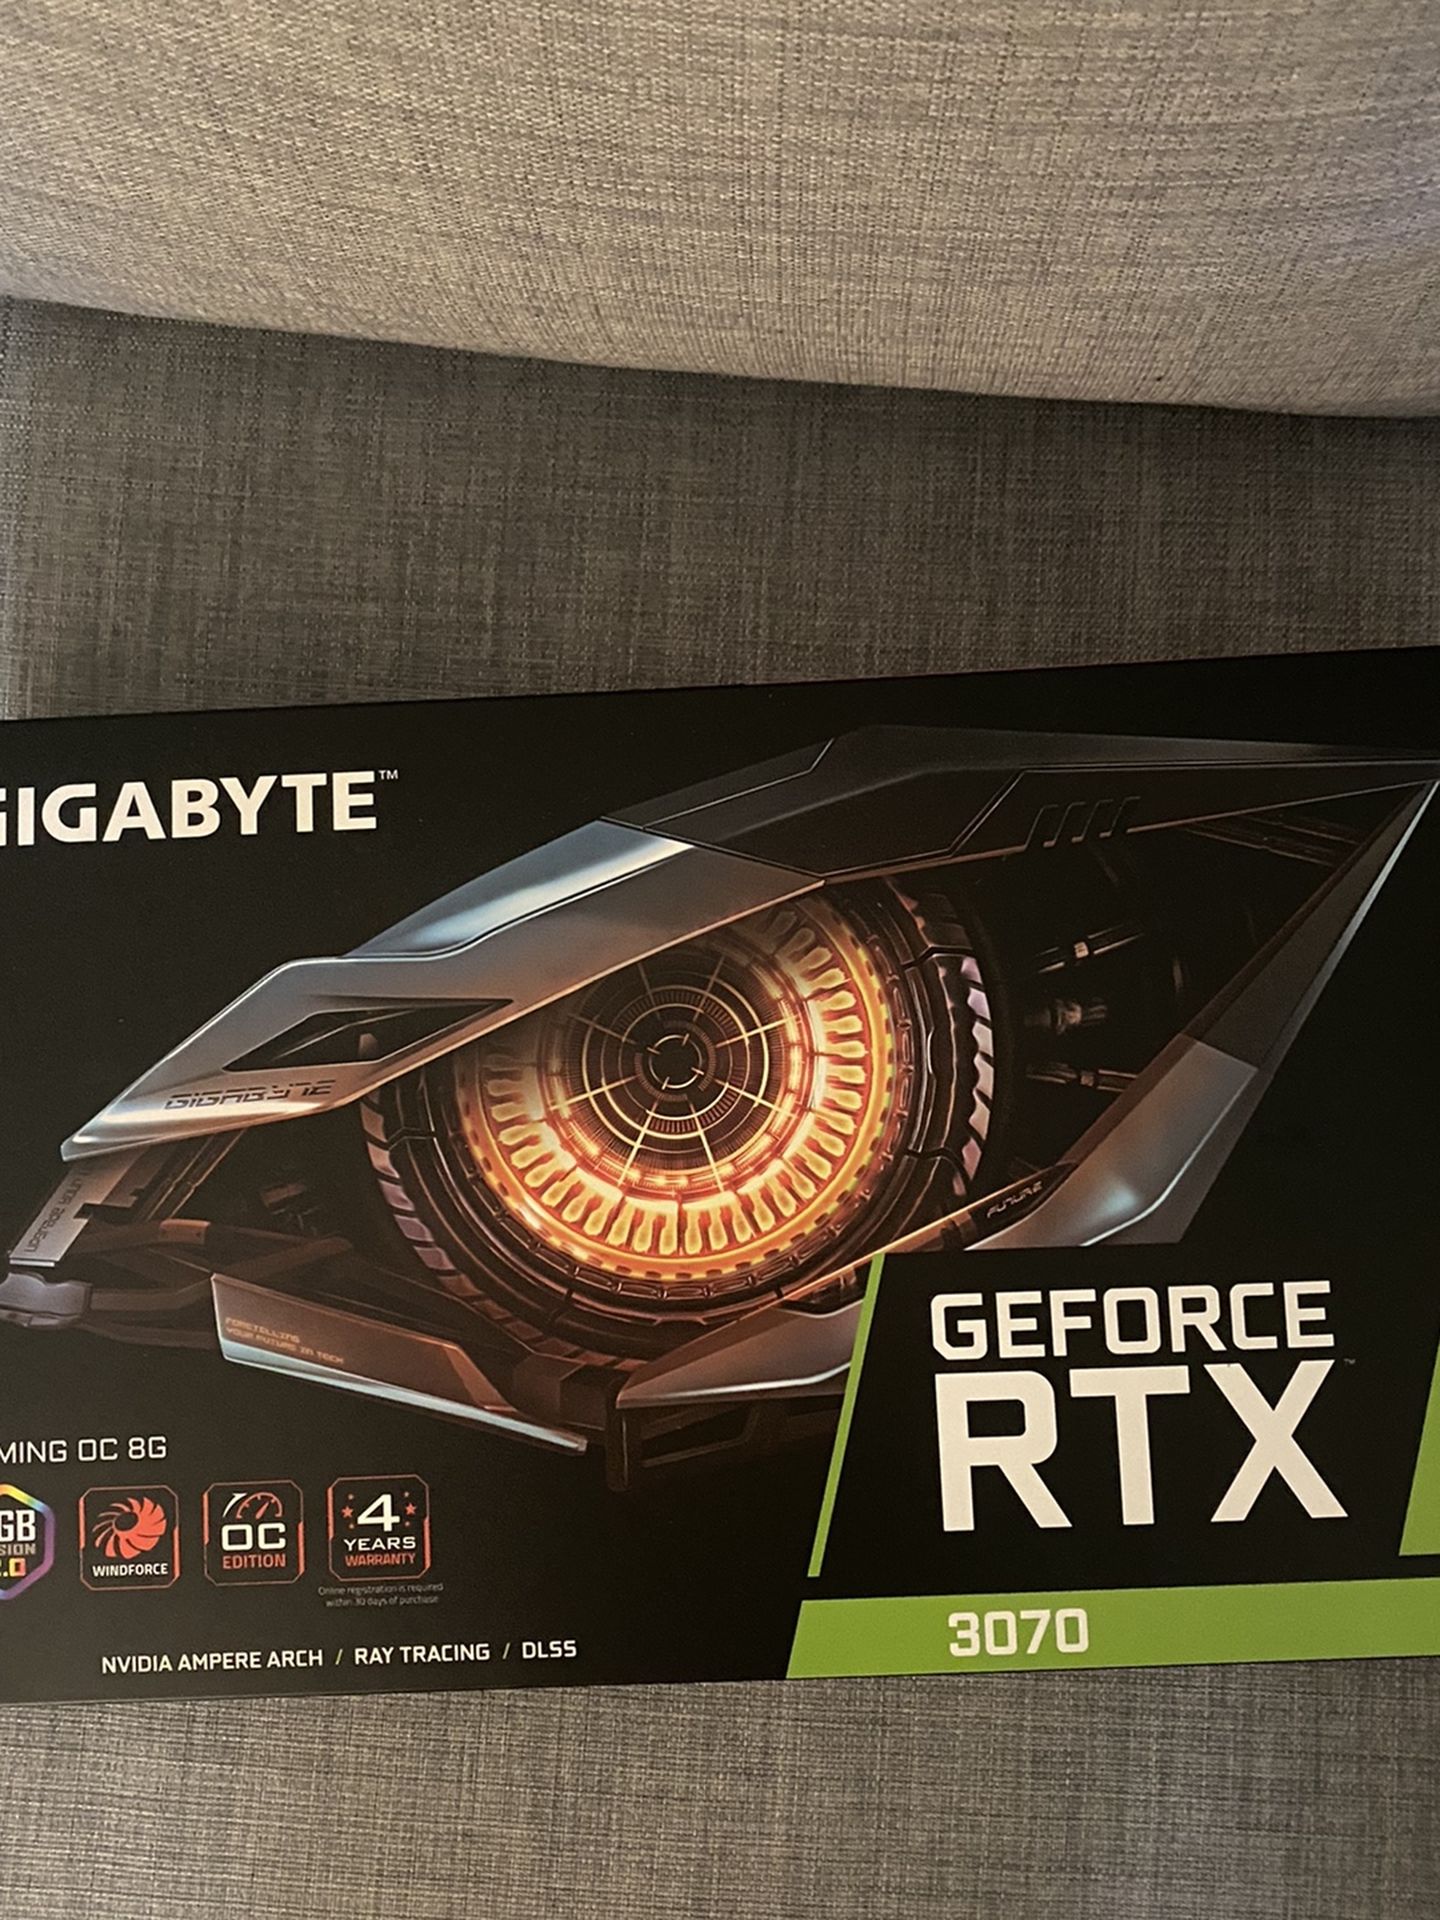 Selling A Brand New Rtx 3070 Gigabyte Gaming OC Edition!